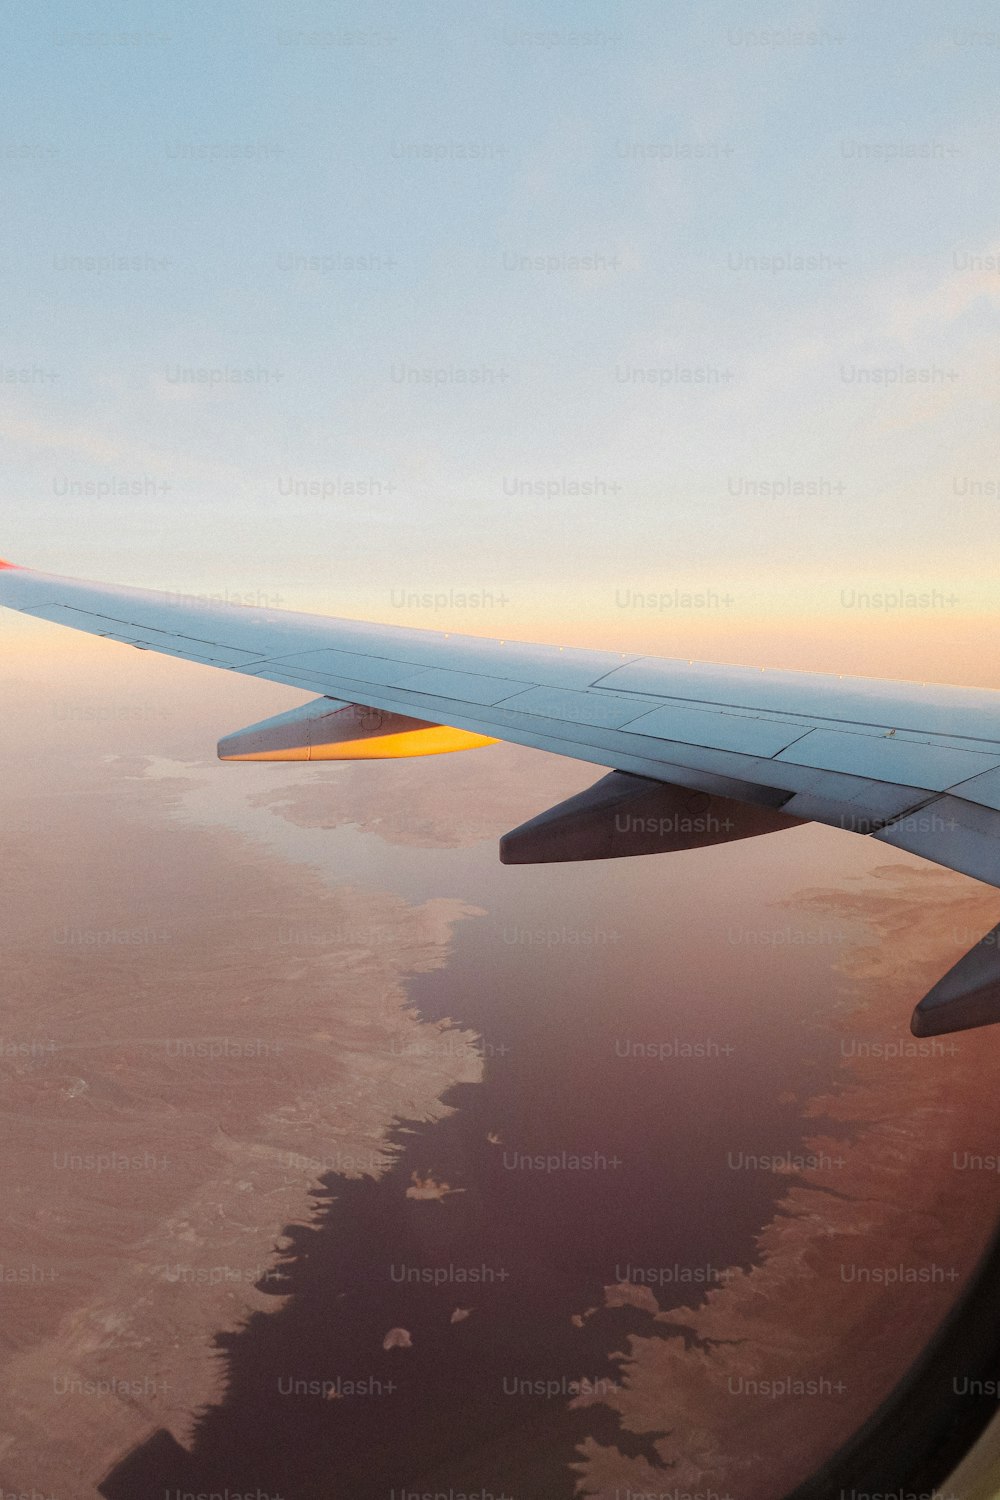 a view of the wing of an airplane as it flies over a body of water